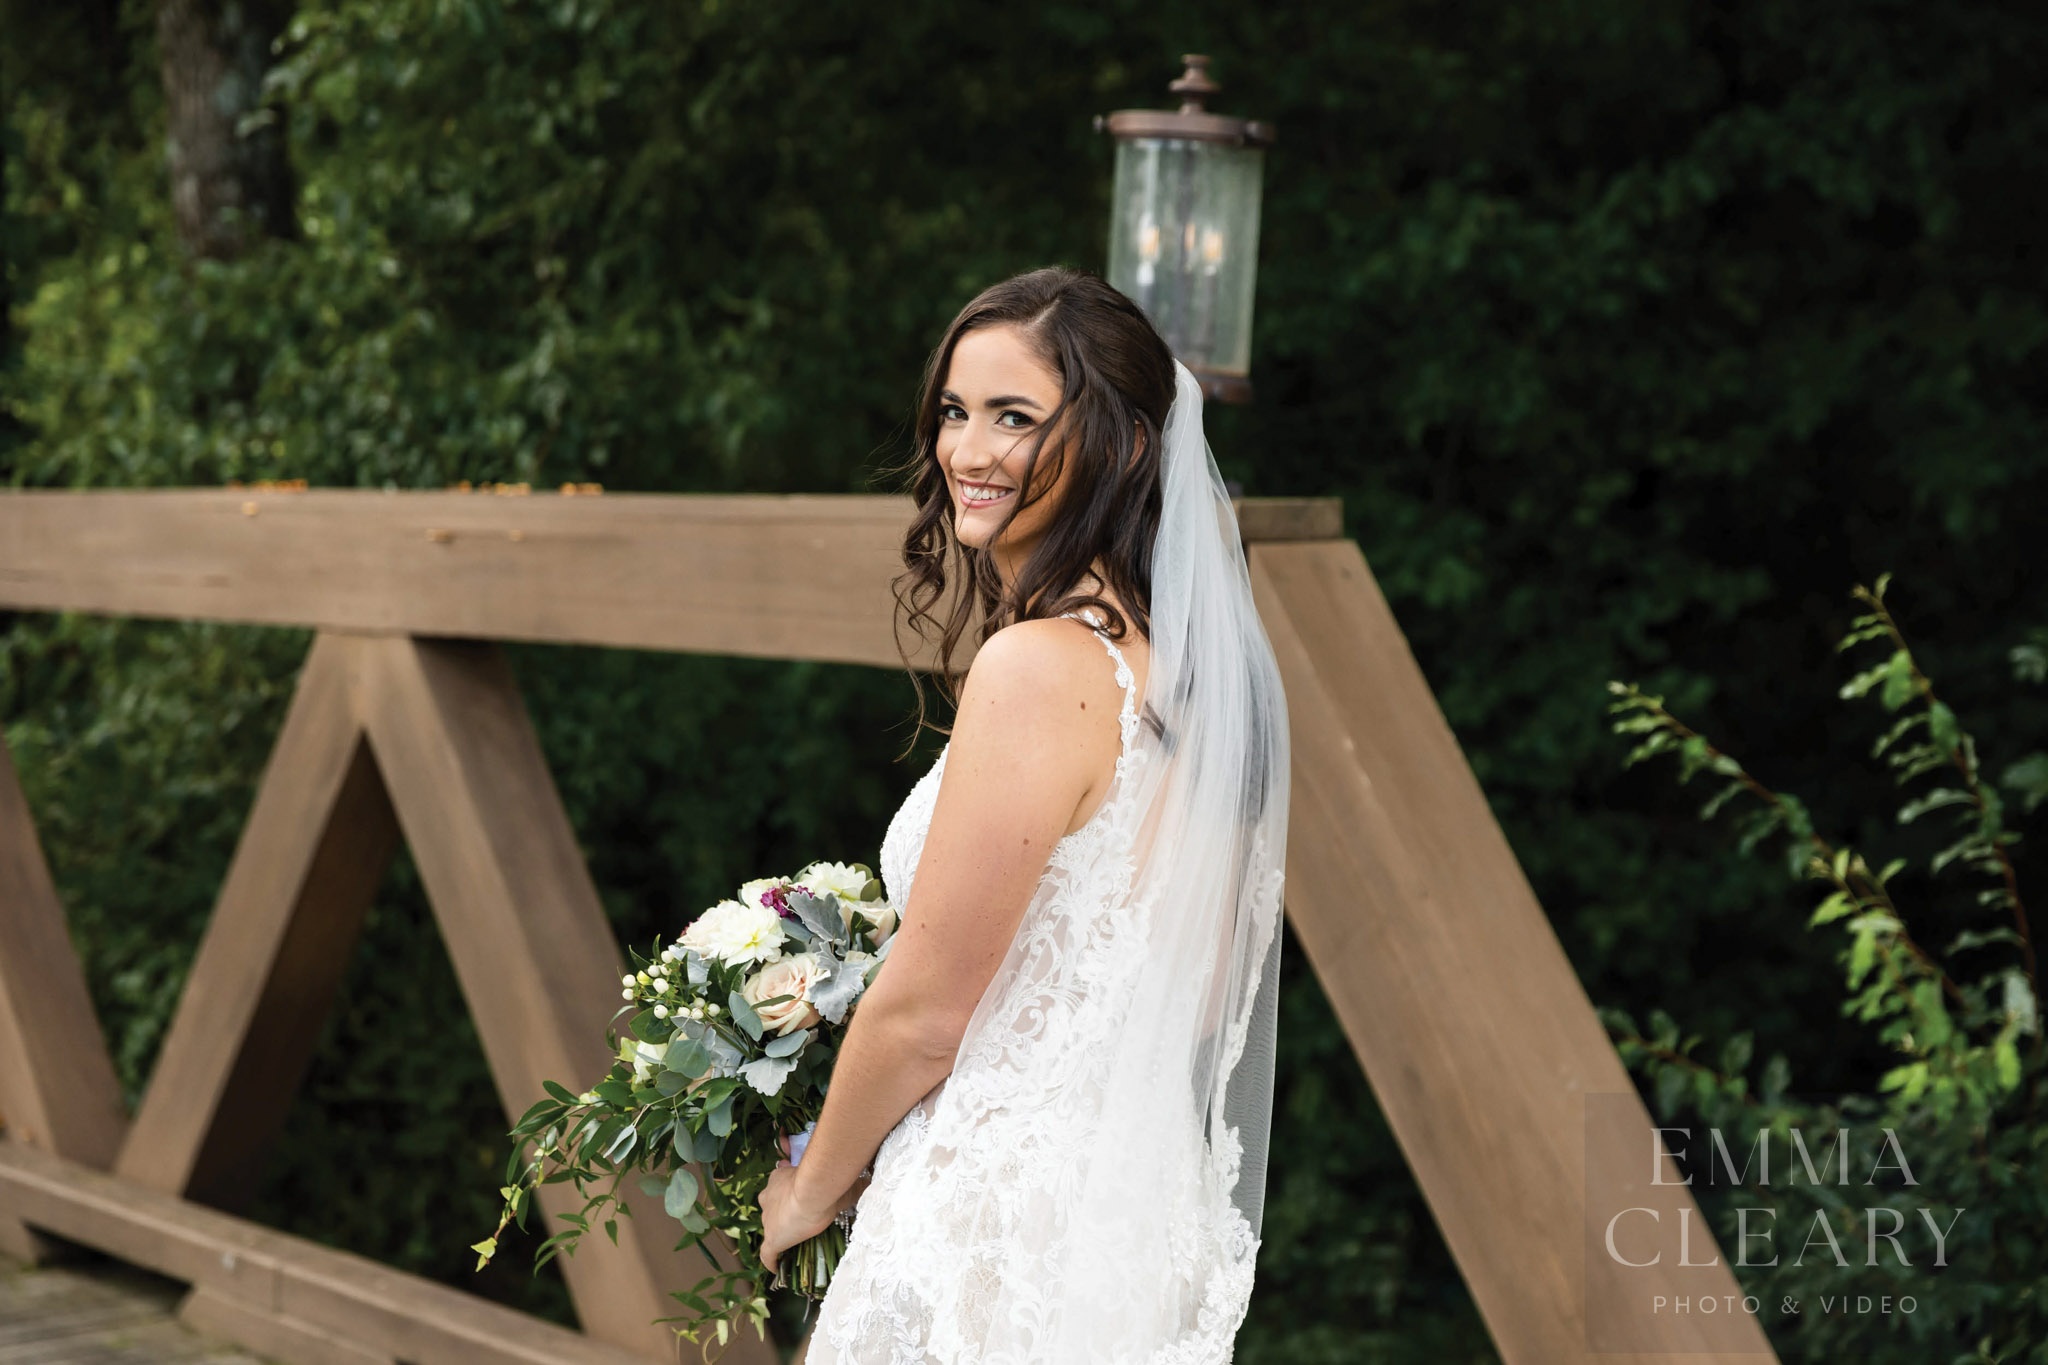 Portrait of the bride outdoors